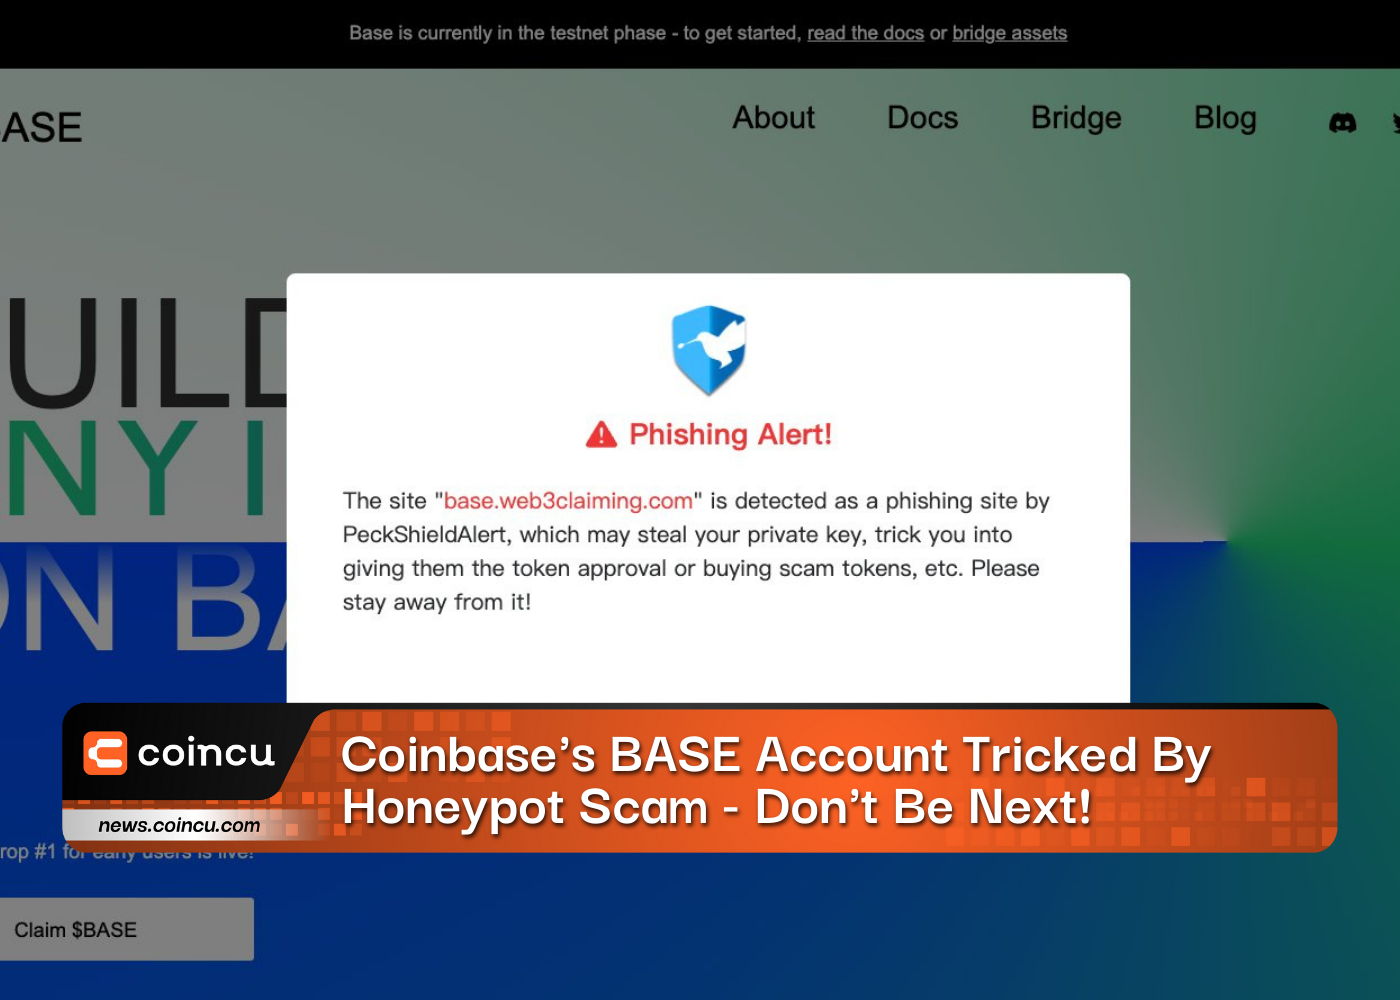 Coinbases BASE Account Tricked By